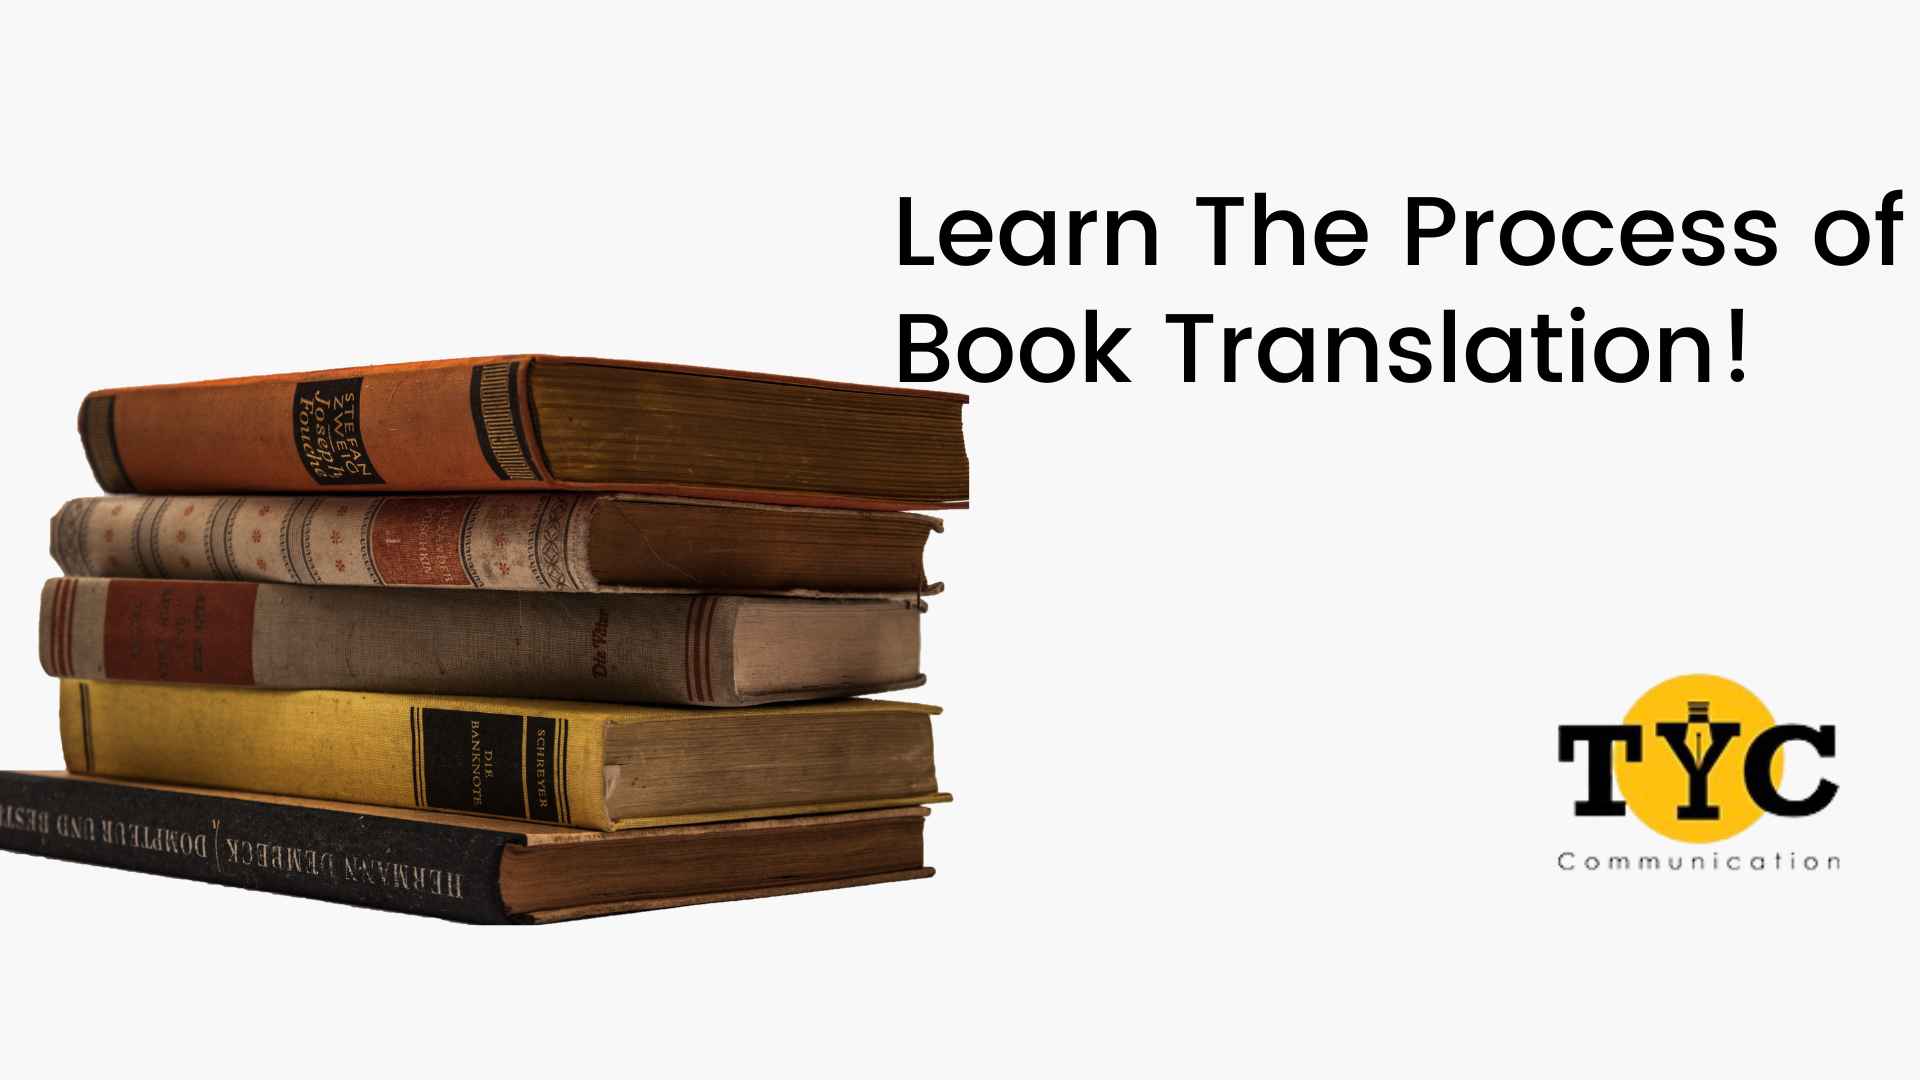 Learn The Process of Book Translation! (2)-1fd5d443